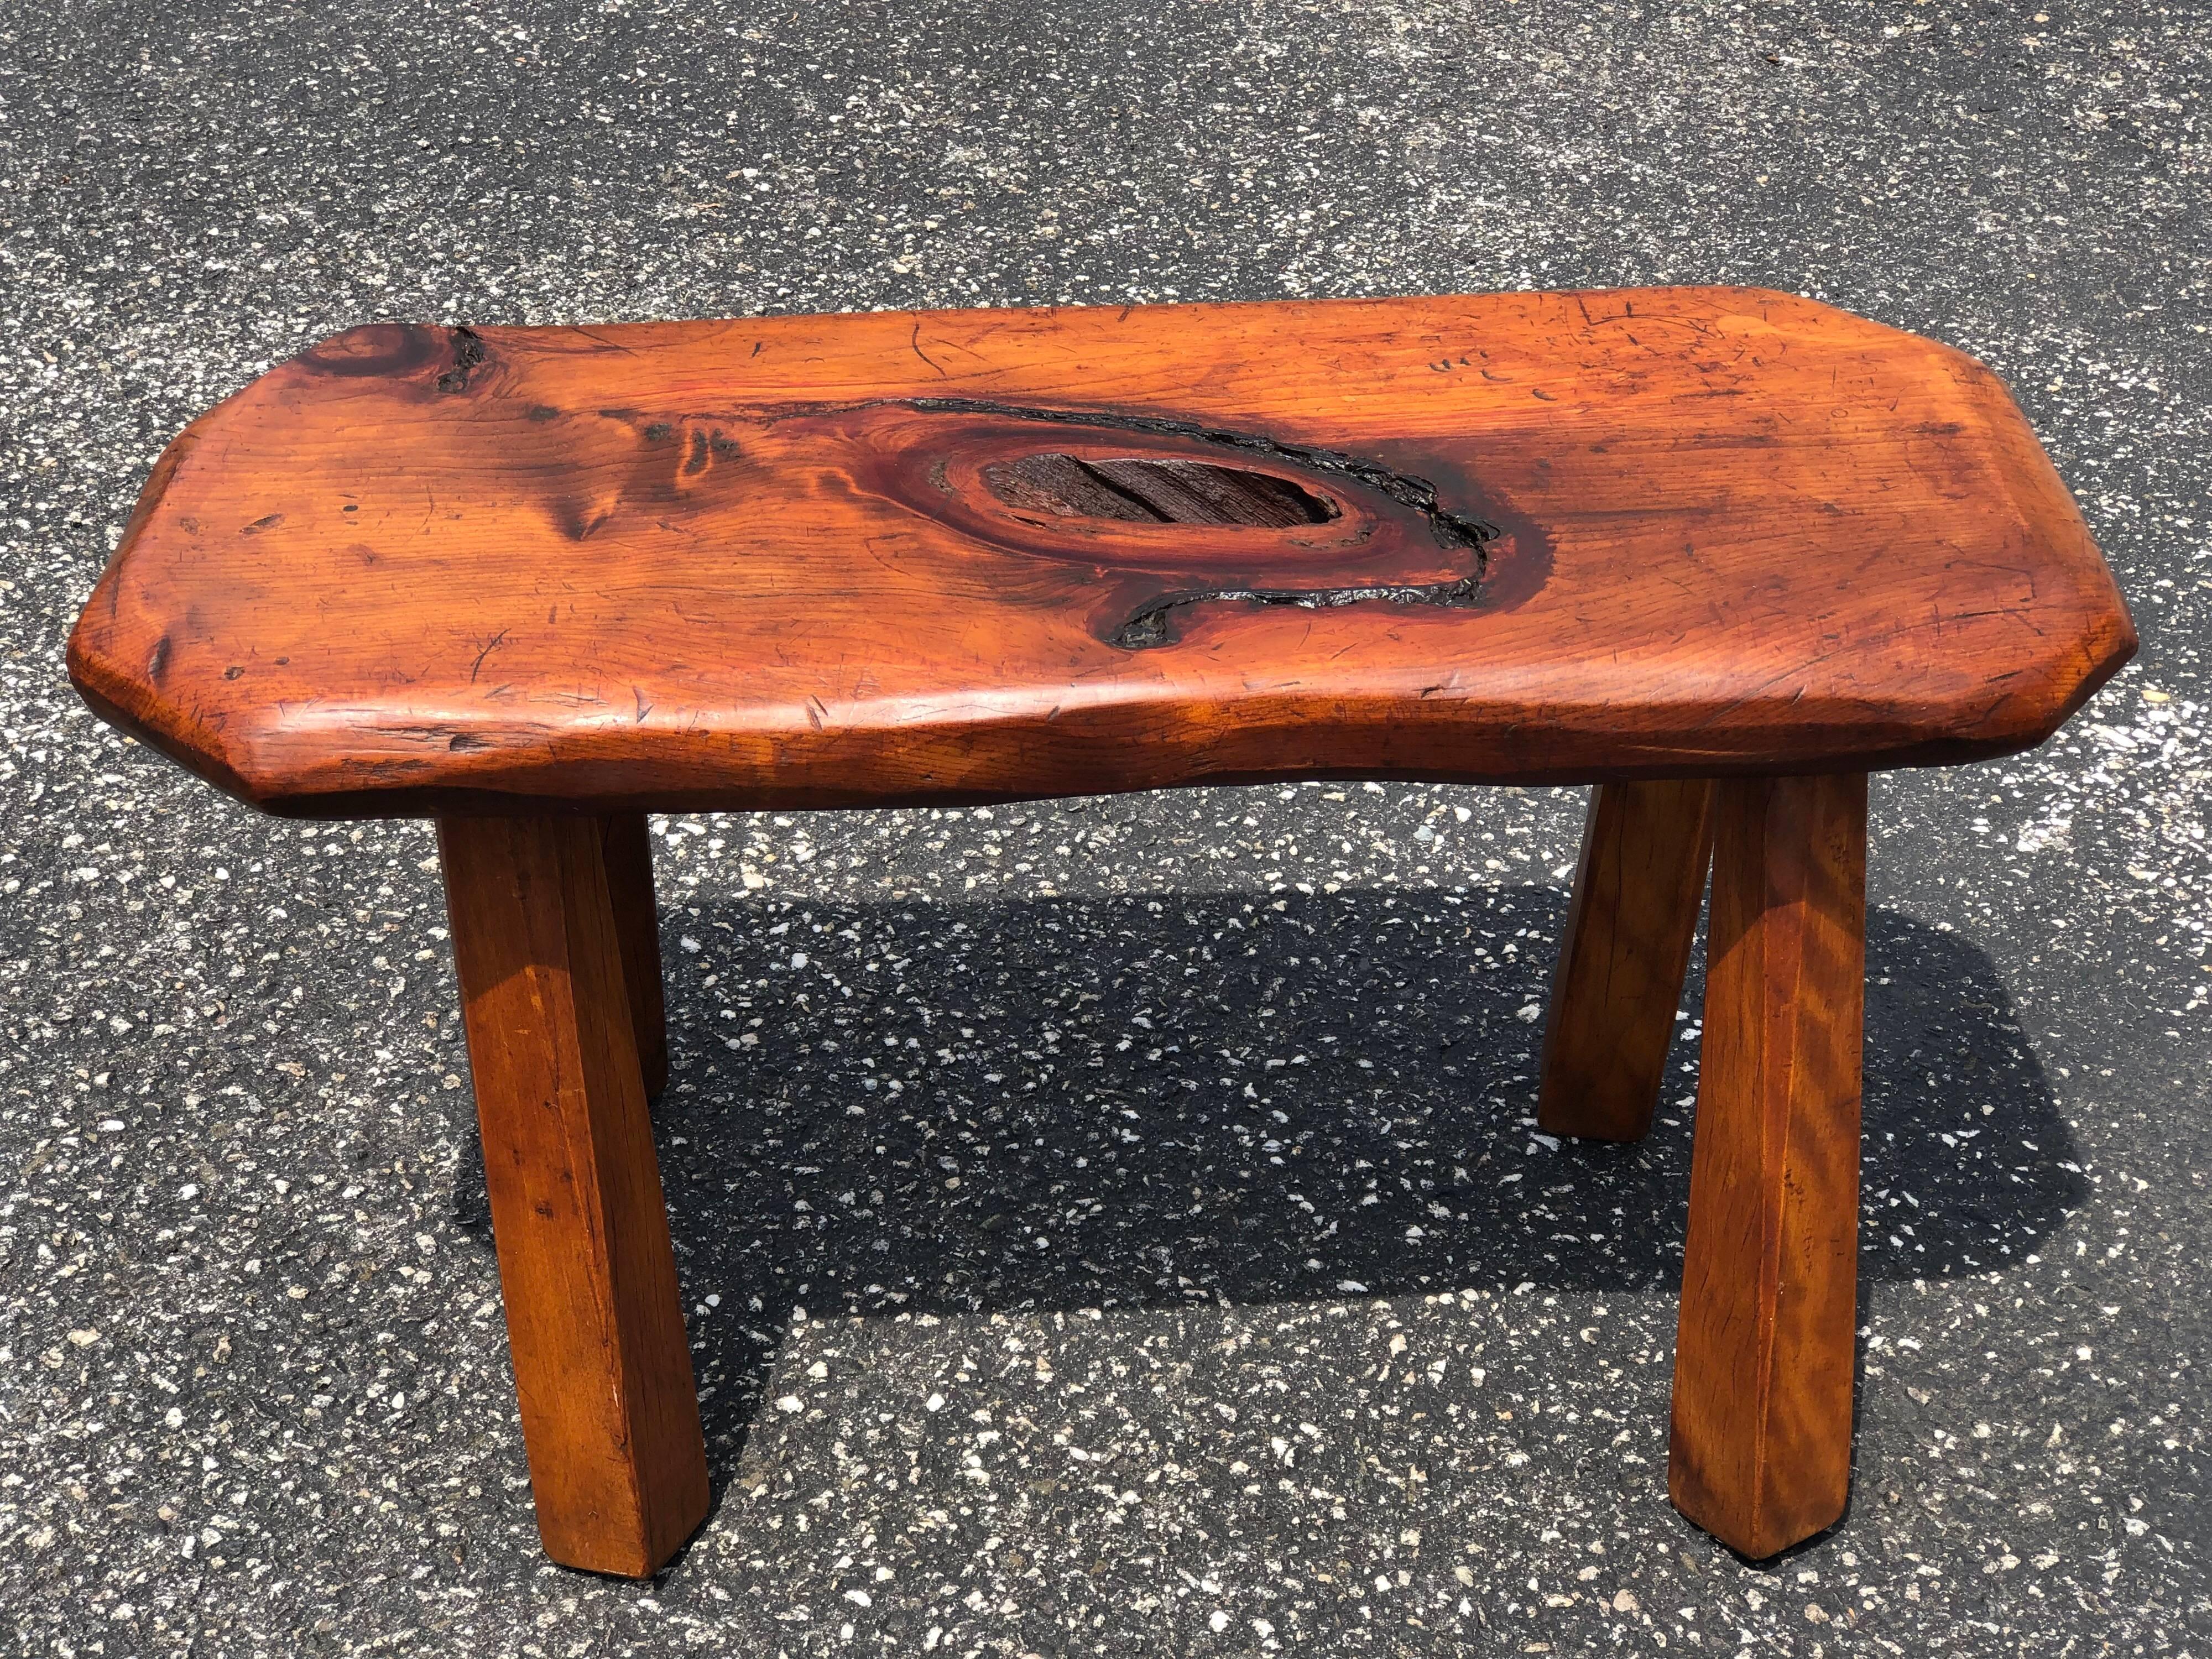 Mid-Century Modern live edge bench or table. We think this may be made of black walnut. Very nice design and easy size to find a place for. Use as a bench, stool or table. It has a knot hole in the middle of the stool seat. It is numbered